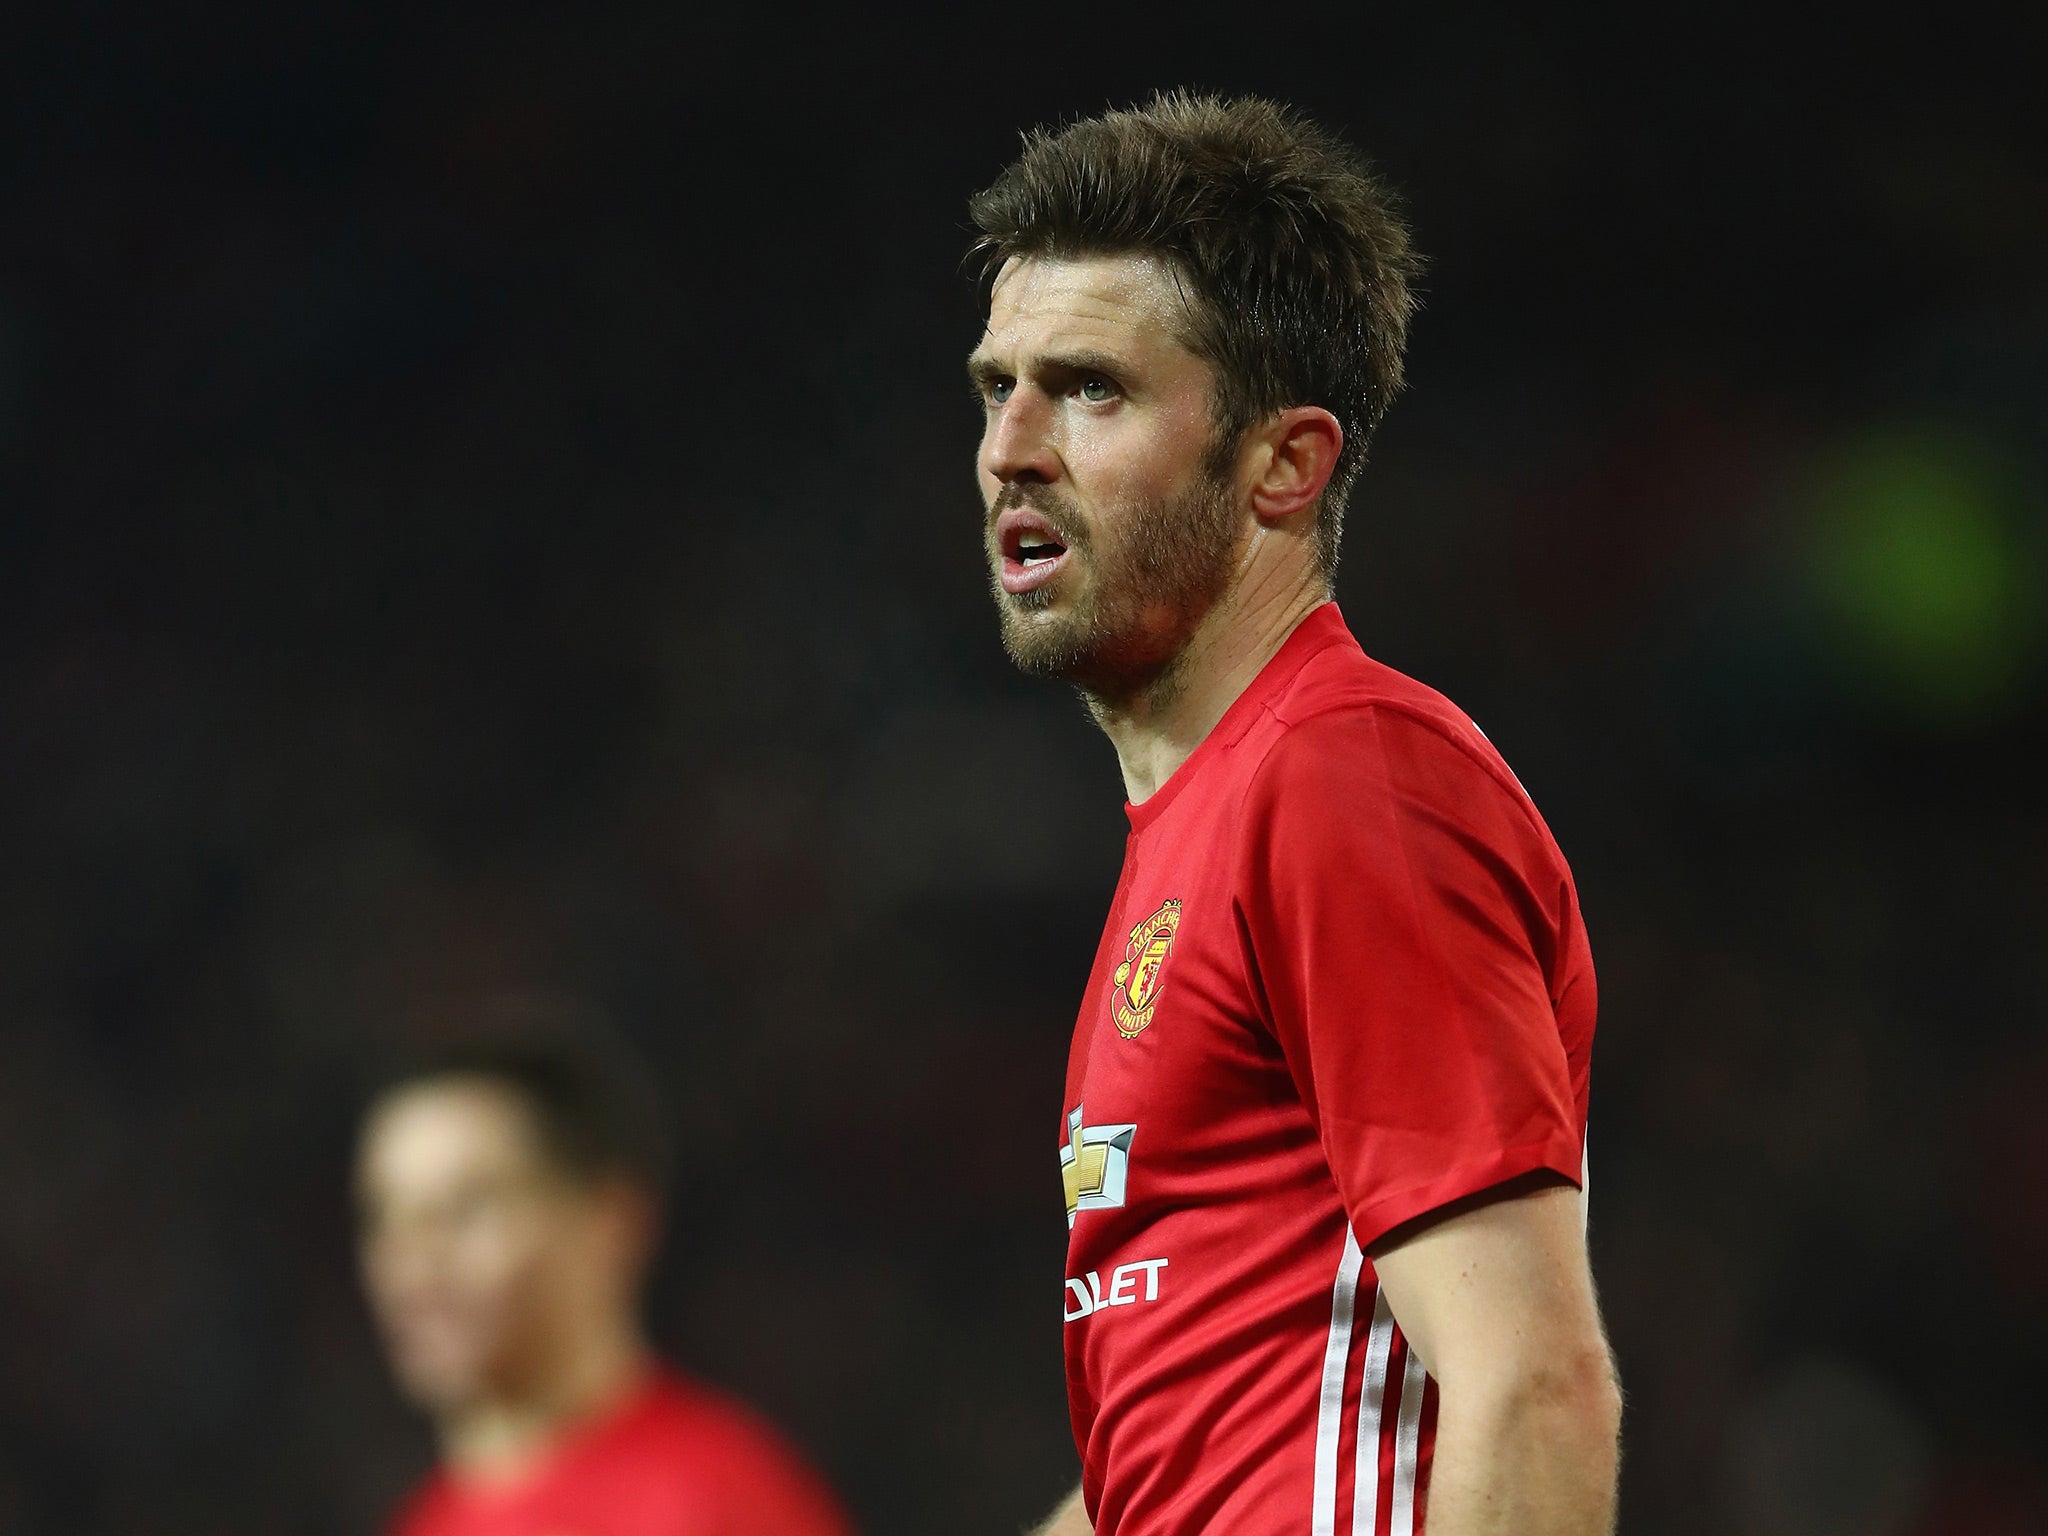 Carrick is pleased with level of performance shown by United, even if they still languish behind their rivals in the league